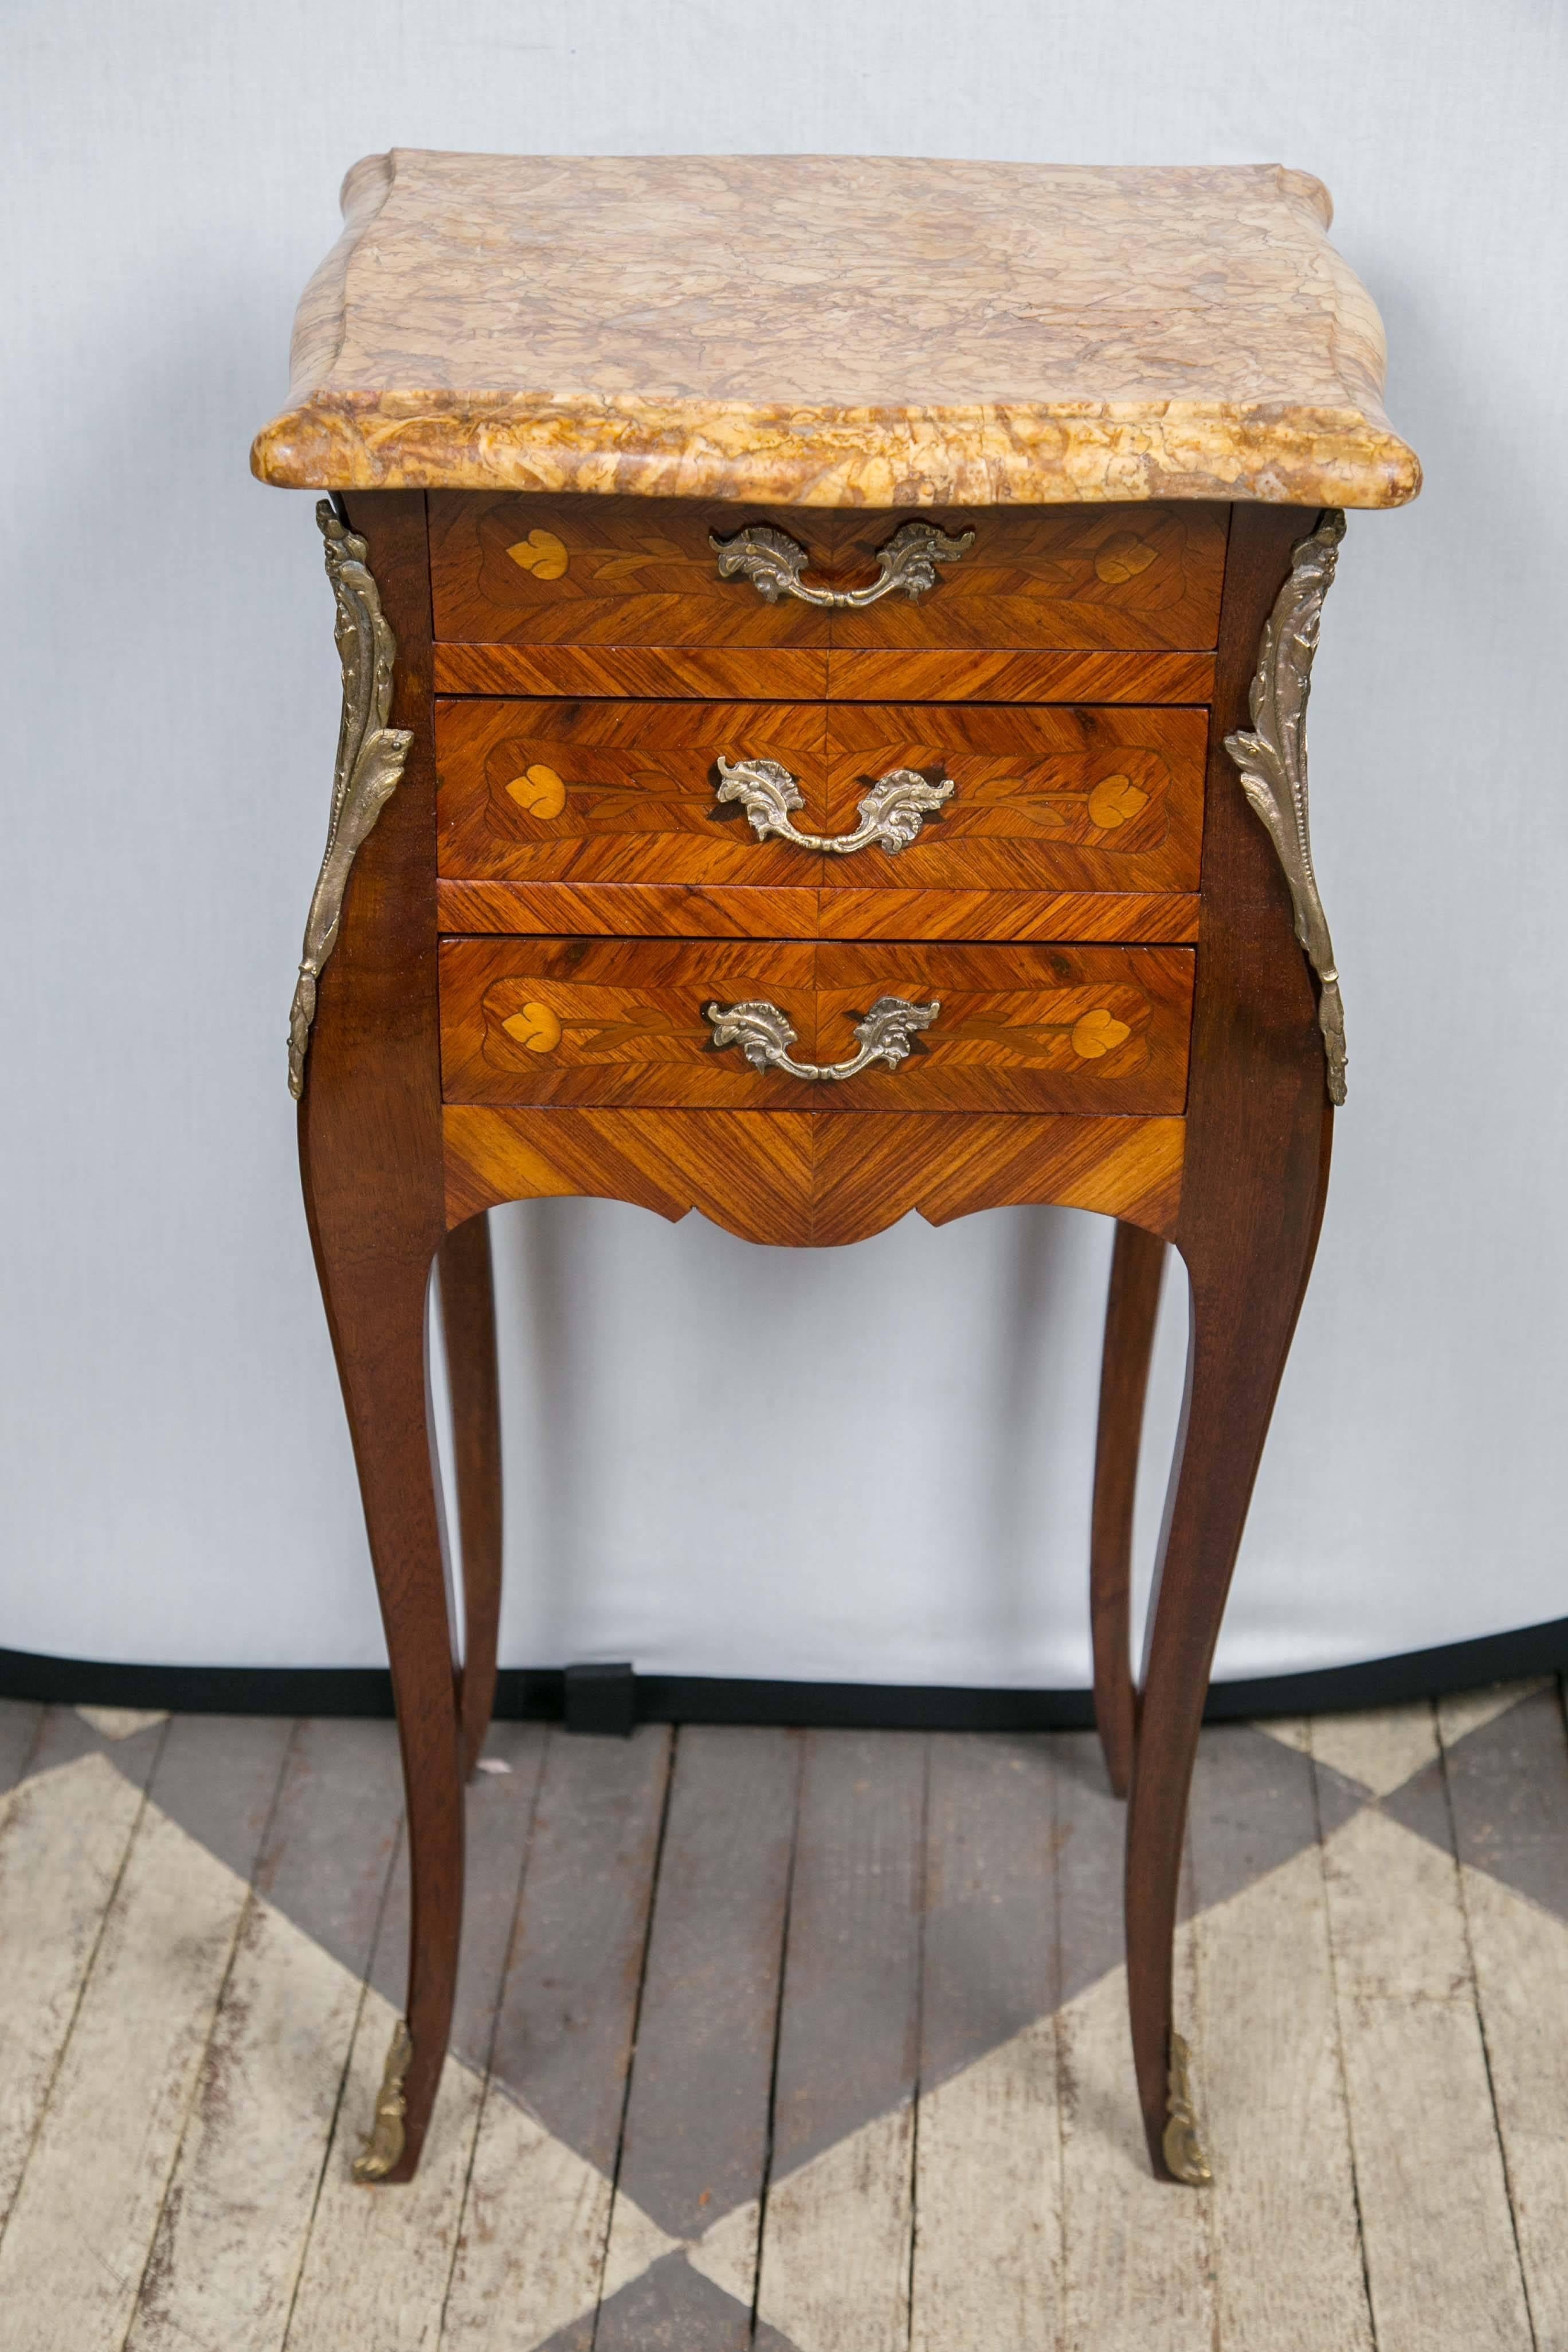 These are veneered in chevron pattern with inlays of simple flowers on the three-drawer fronts. Done in the Louis XV style, they have cabriole legs ending in applied bronze sabots on the front legs only. Shaped marble top, with ogee edge in hues of